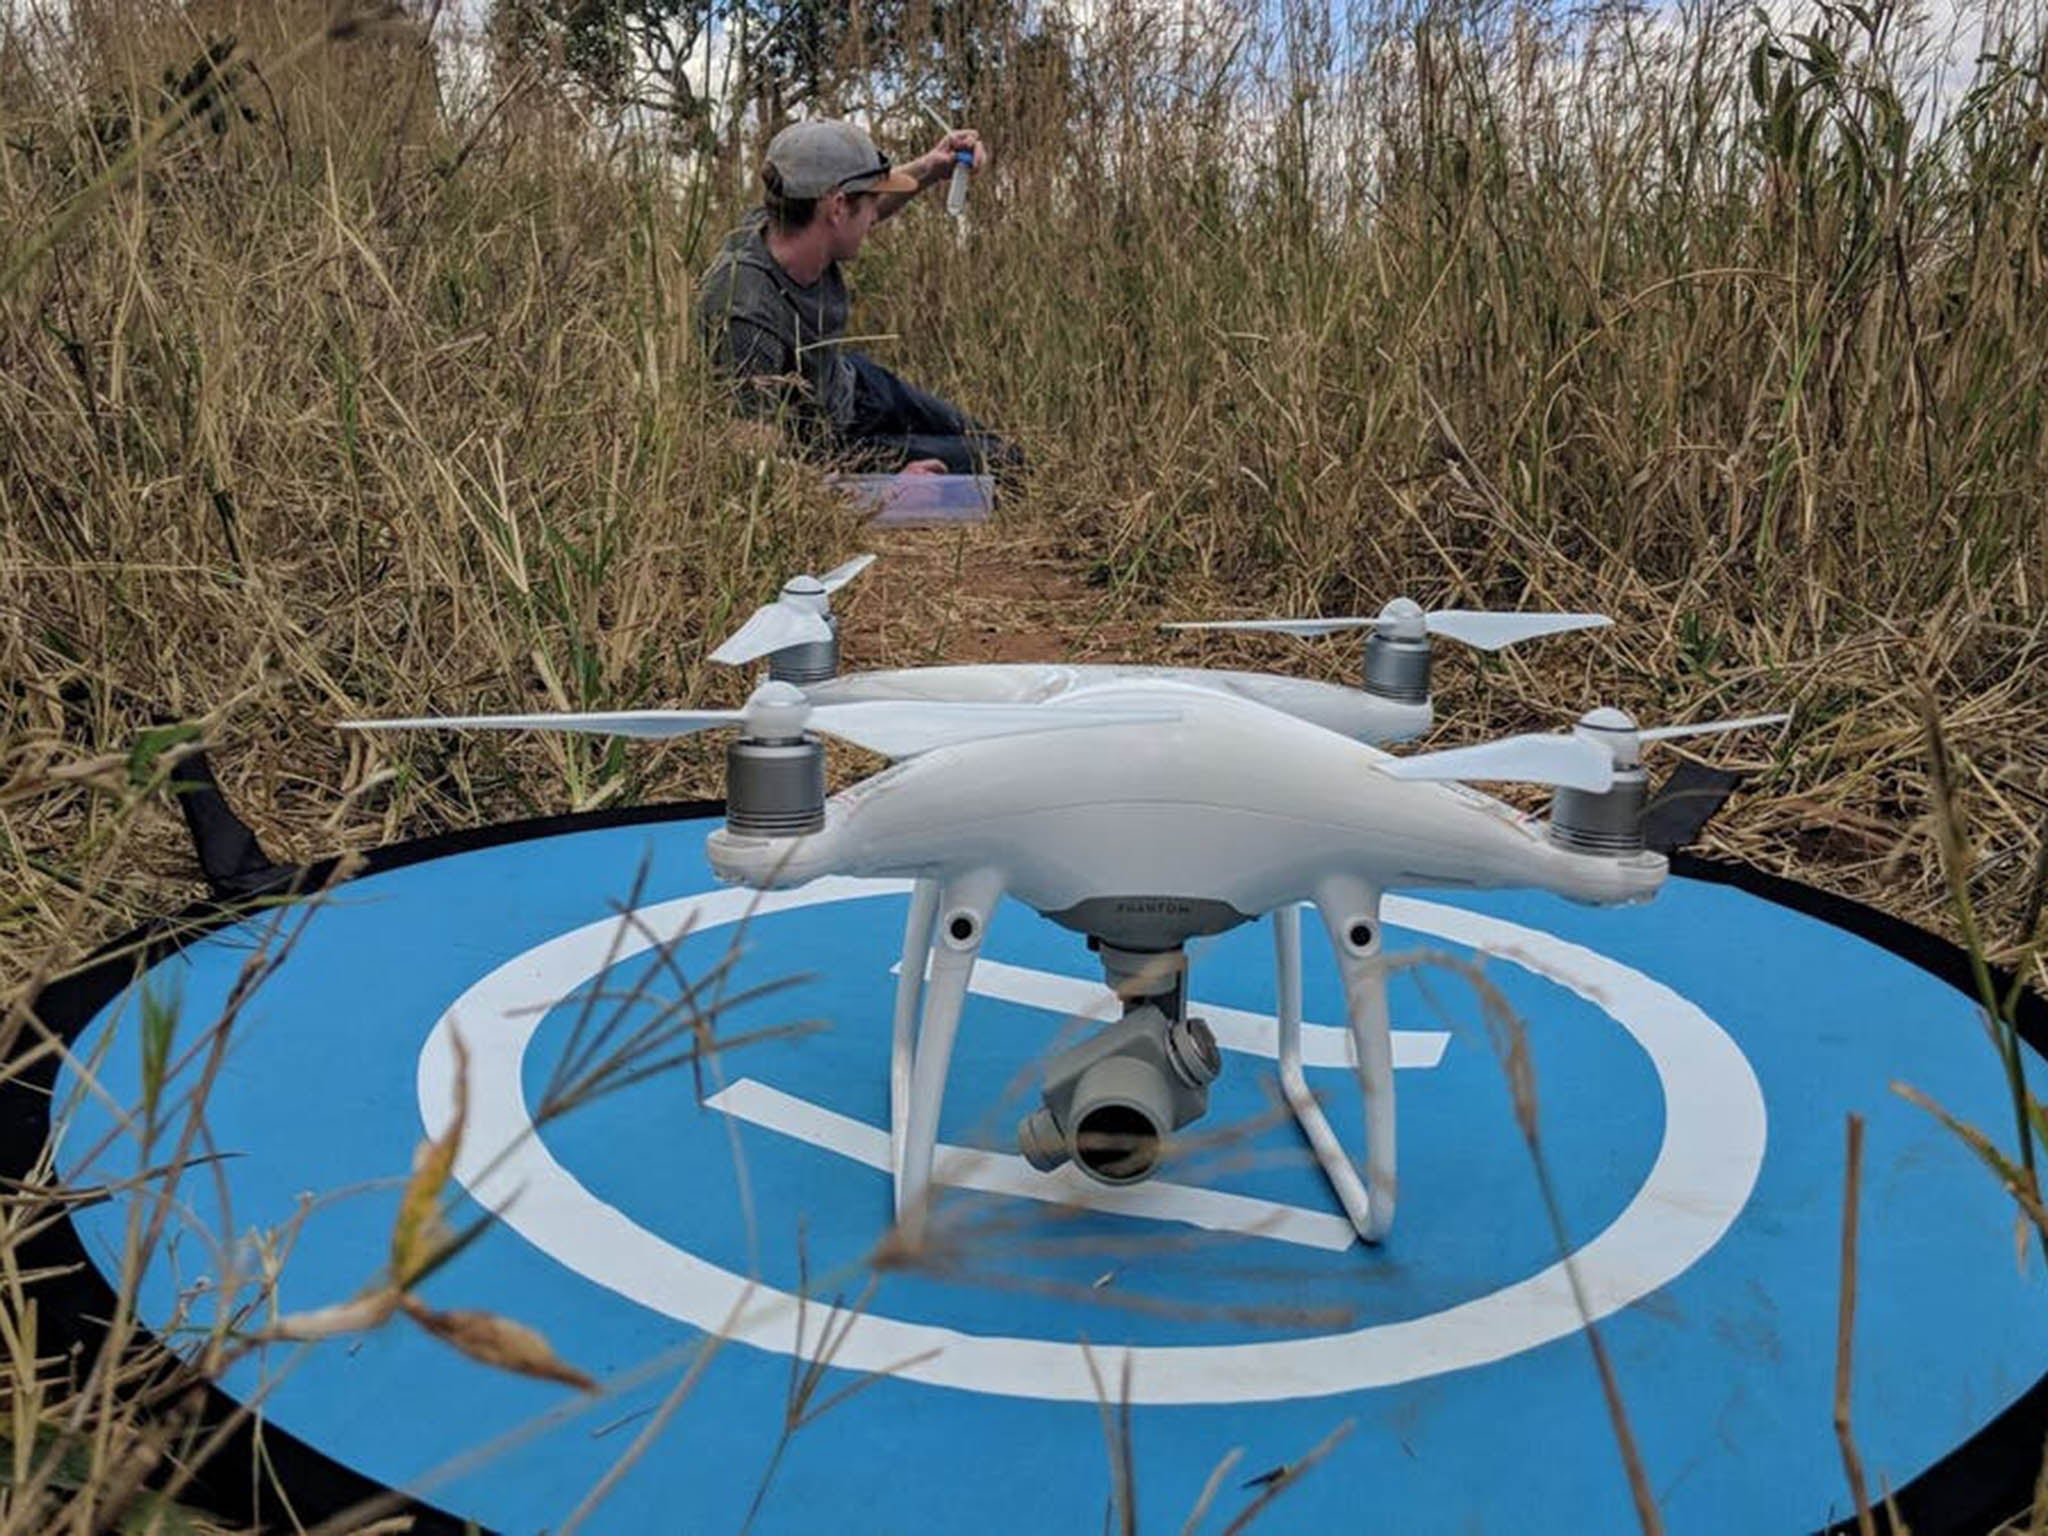 Last year, Unicef set up Africa's first humanitarian drone testing corridor